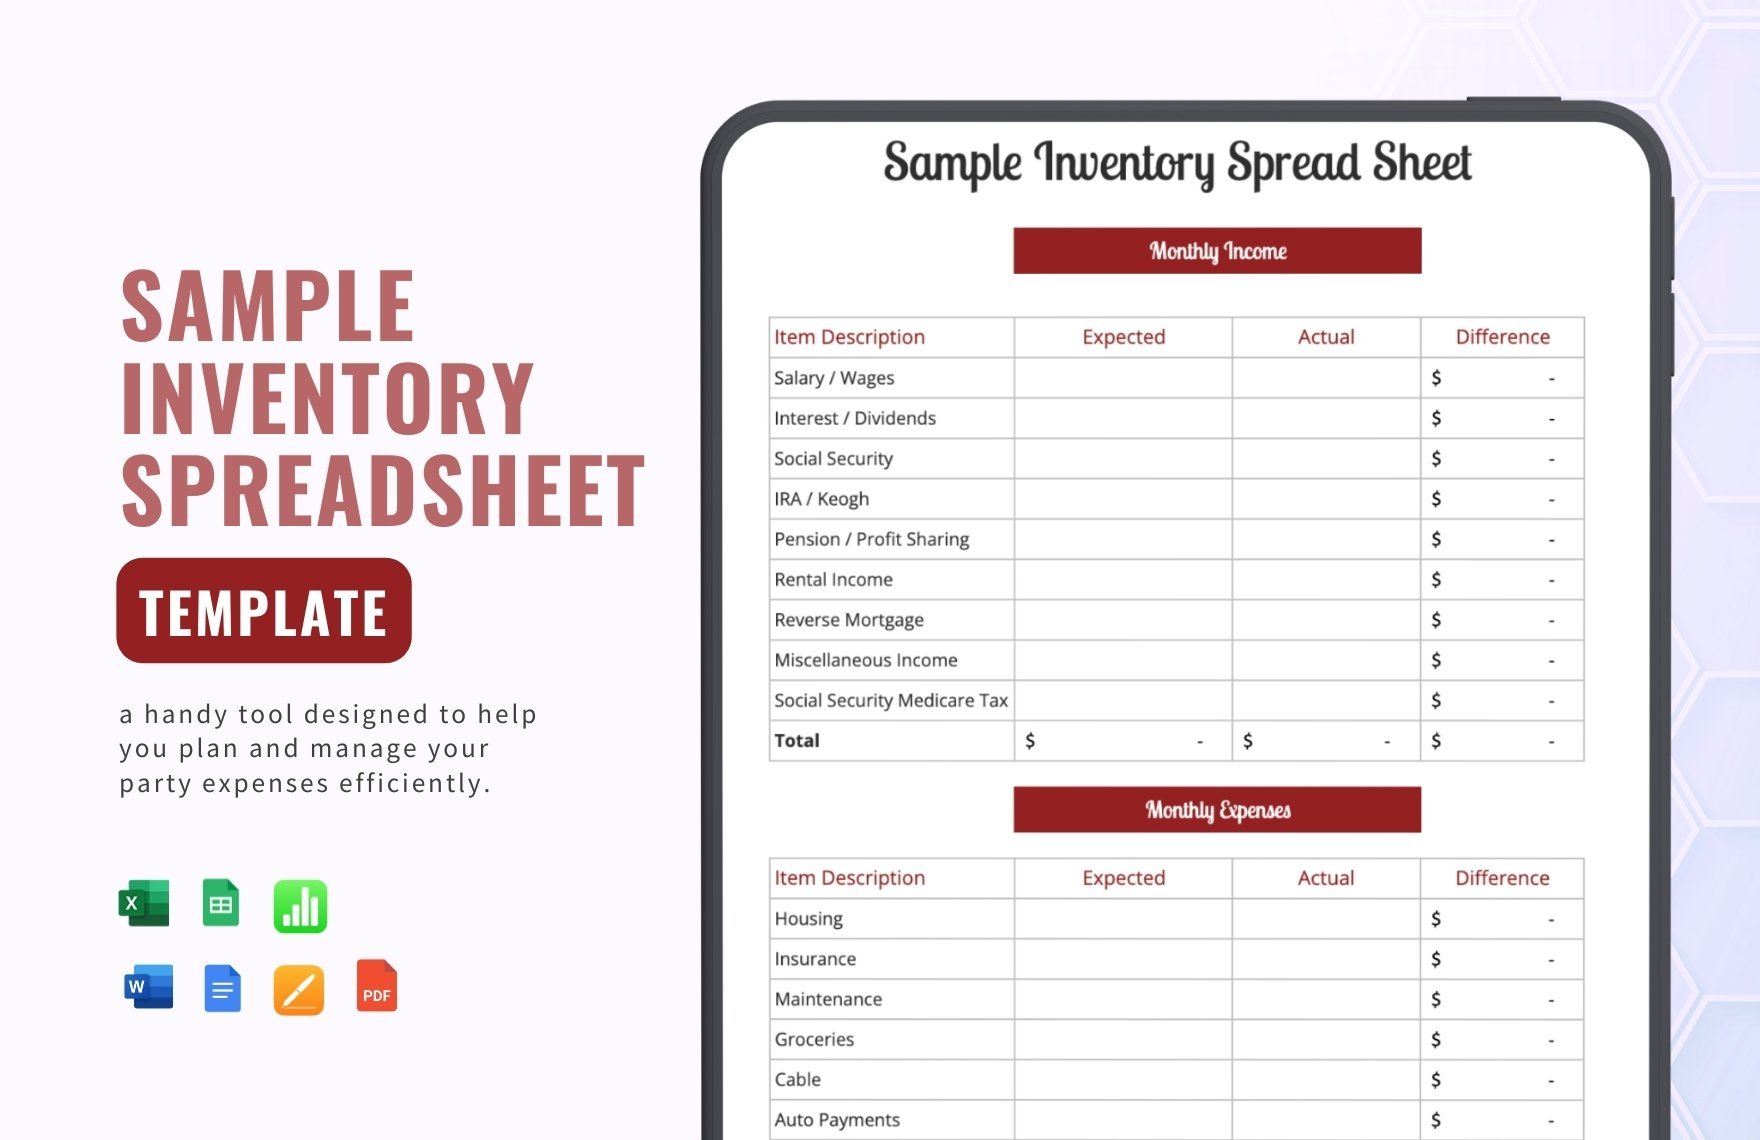 Free Sample Inventory Spreadsheet Template in Word, Google Docs, Excel, PDF, Google Sheets, Apple Pages, Apple Numbers